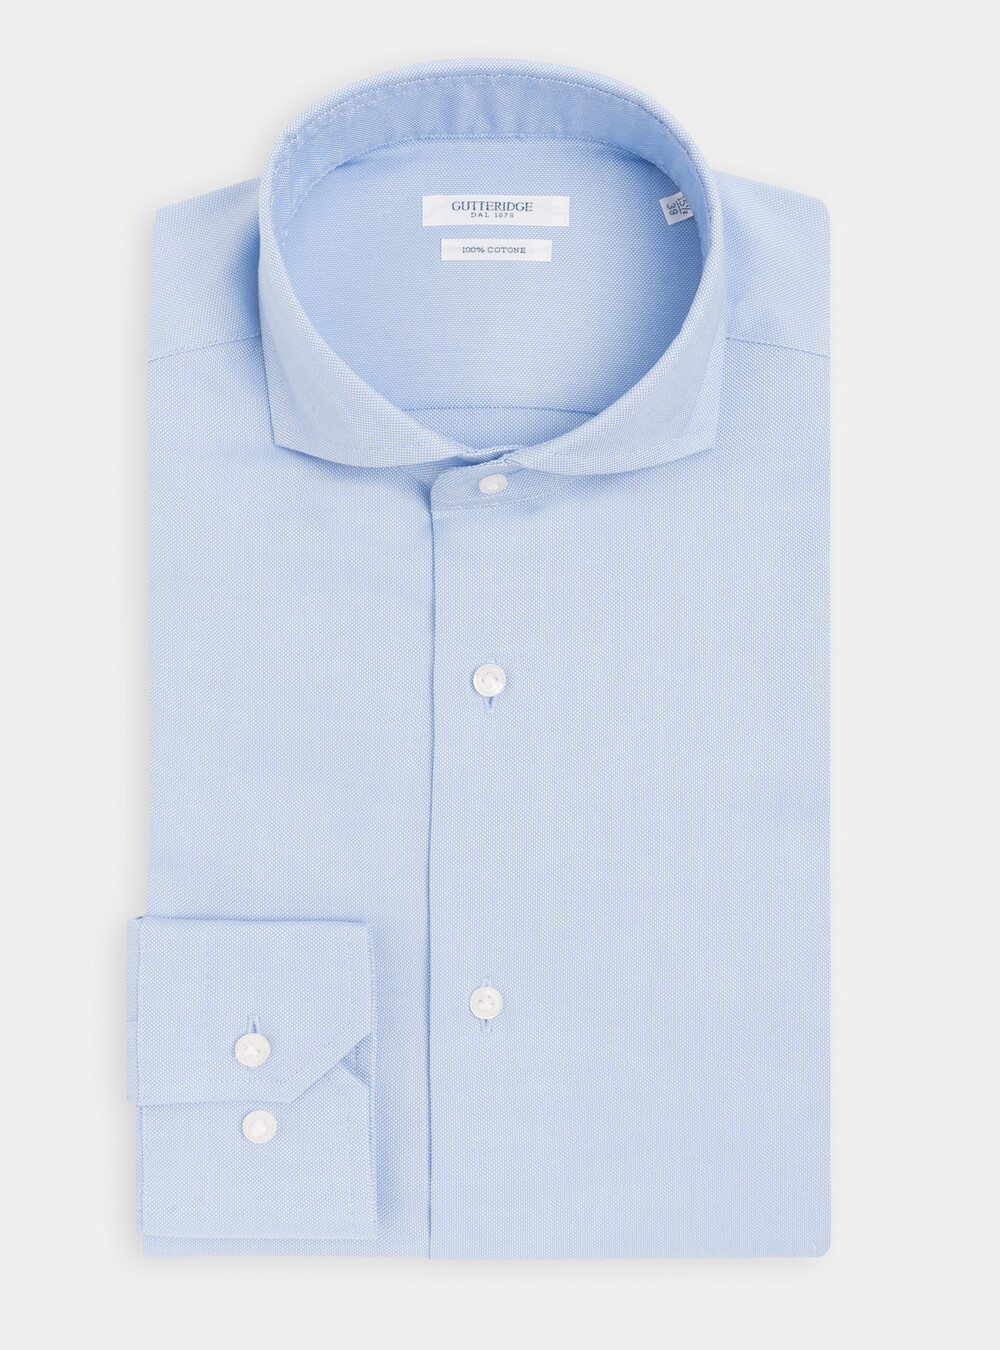 French collar shirt in cotton oxford